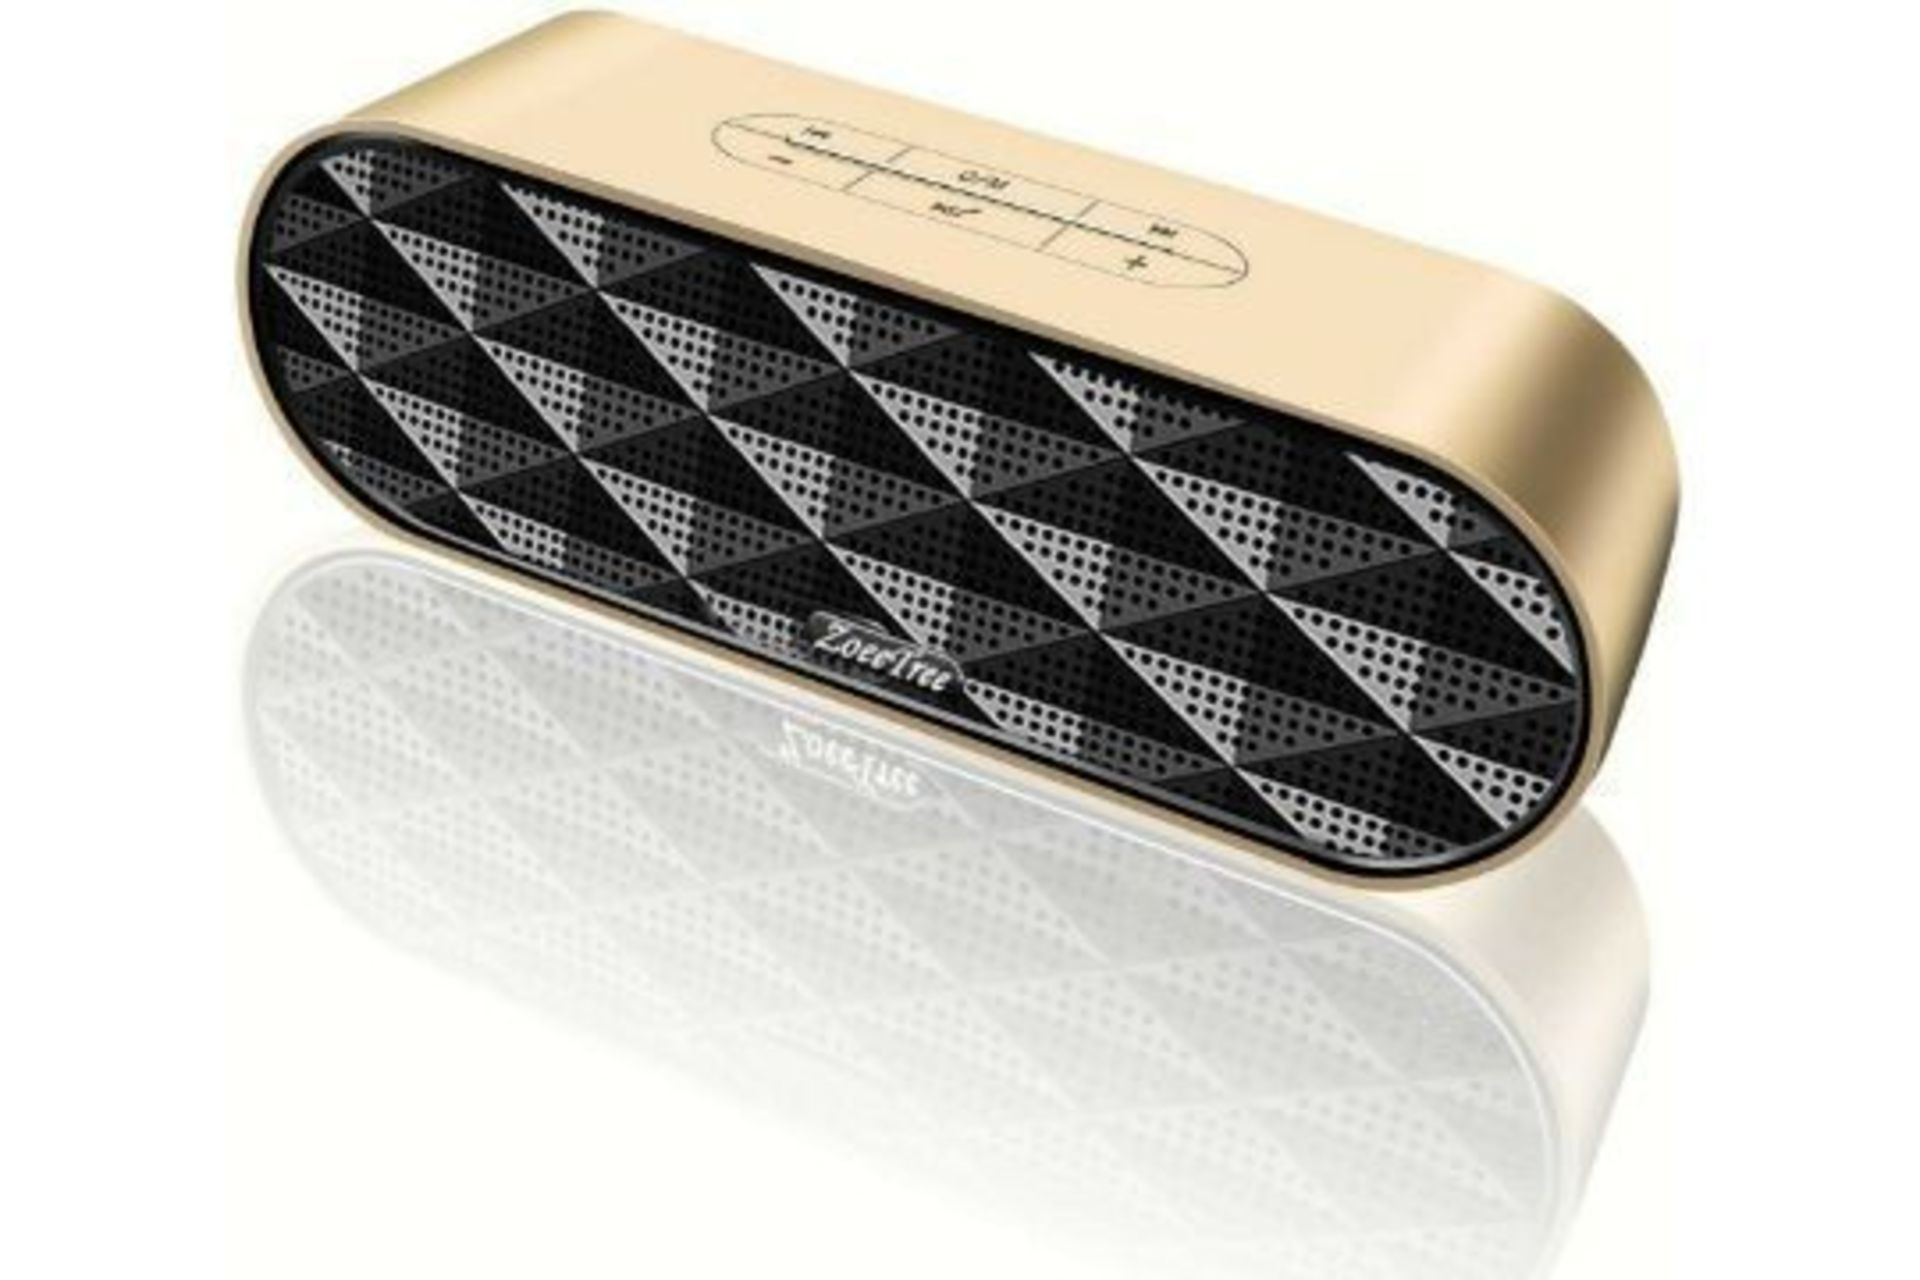 New ZoeTree S3 Portable Wireless Bluetooth Speaker - Image 2 of 2